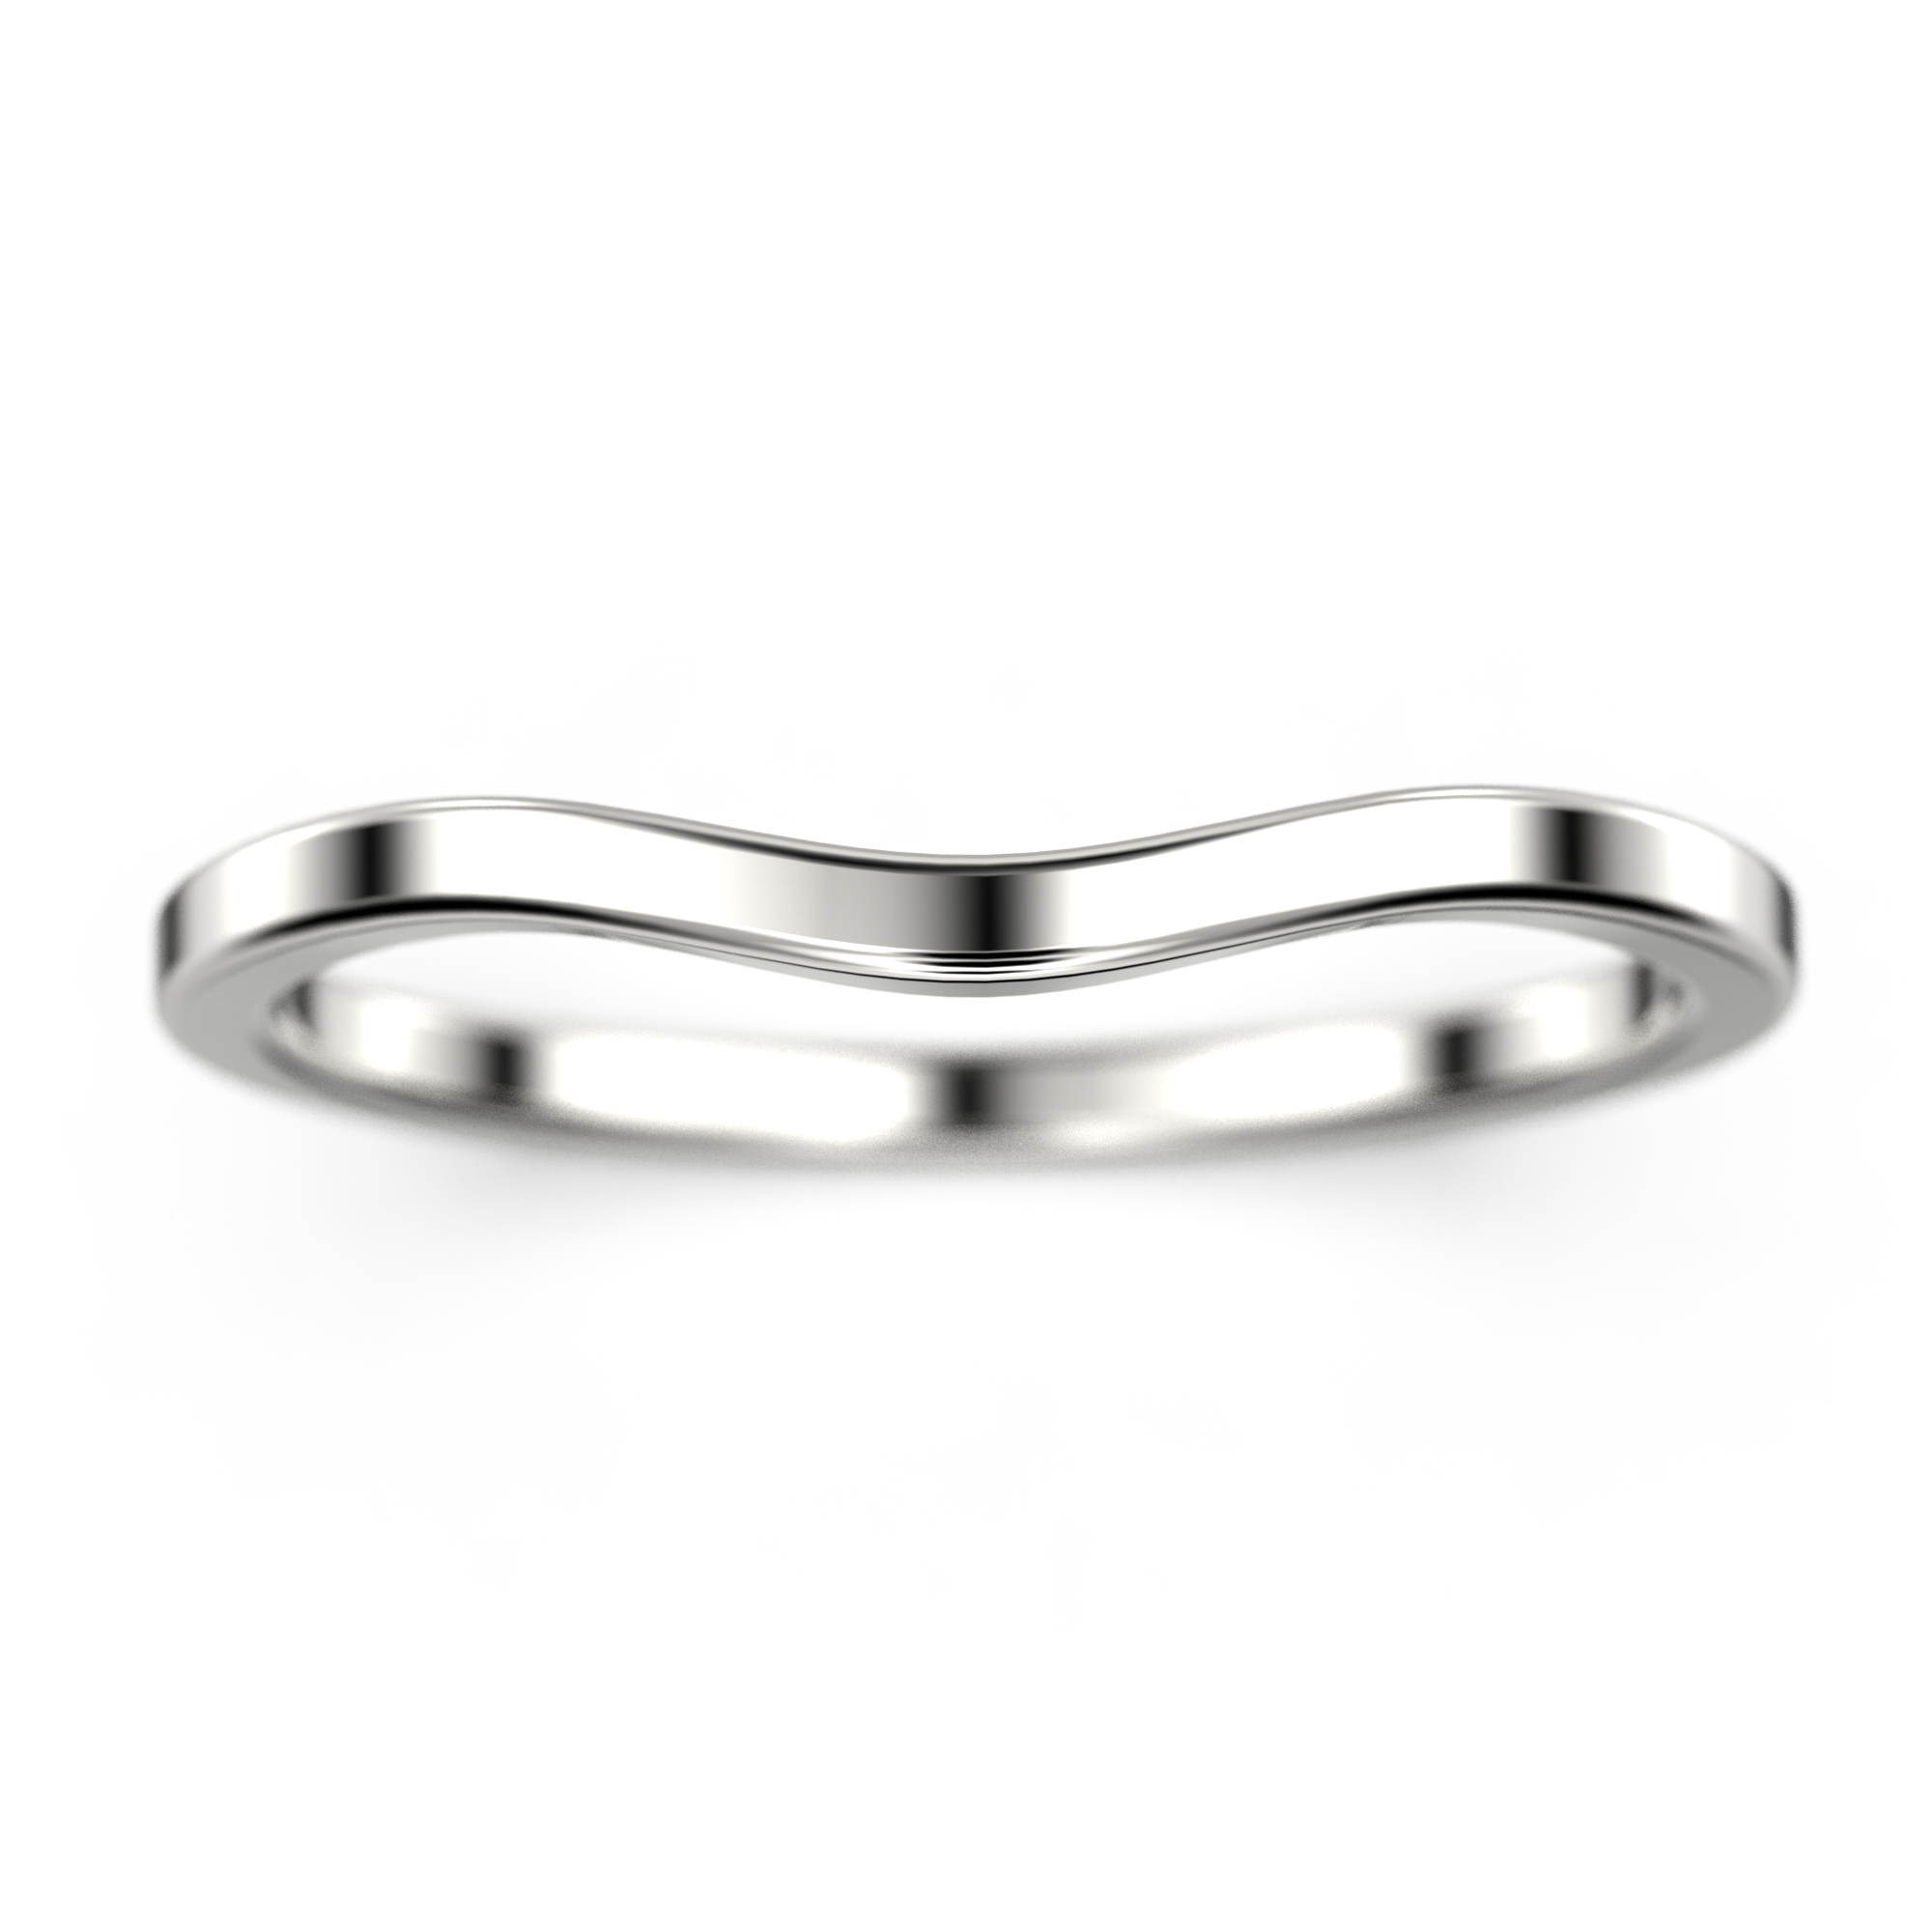 JeenJewels 18K White Gold over silver curved wedding band